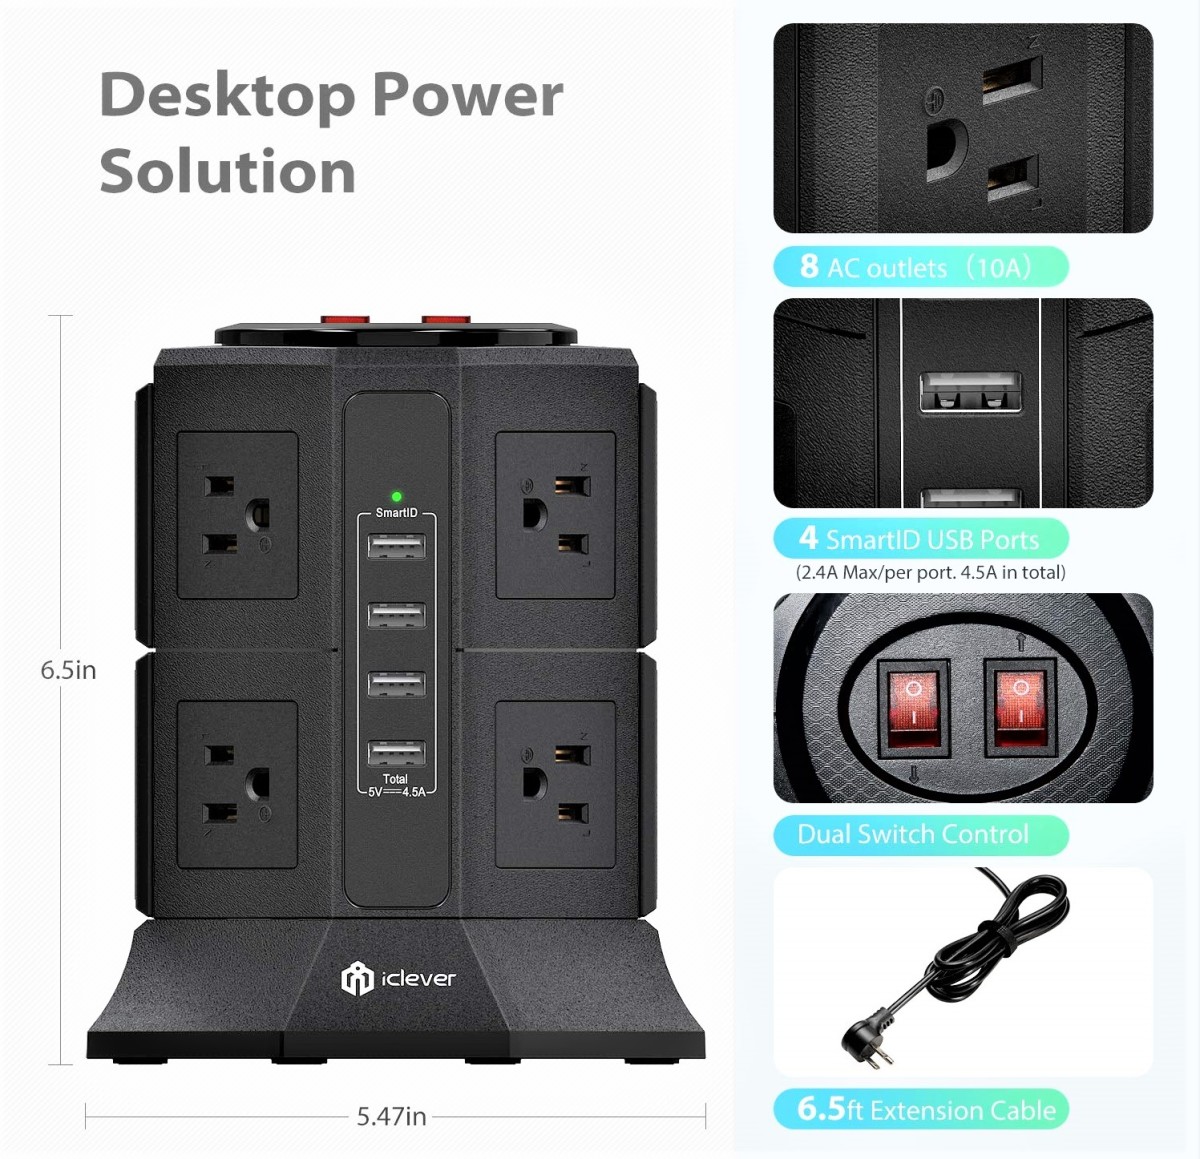 iclever-power-strip-tower-review-the-ultimate-desktop-charging-station